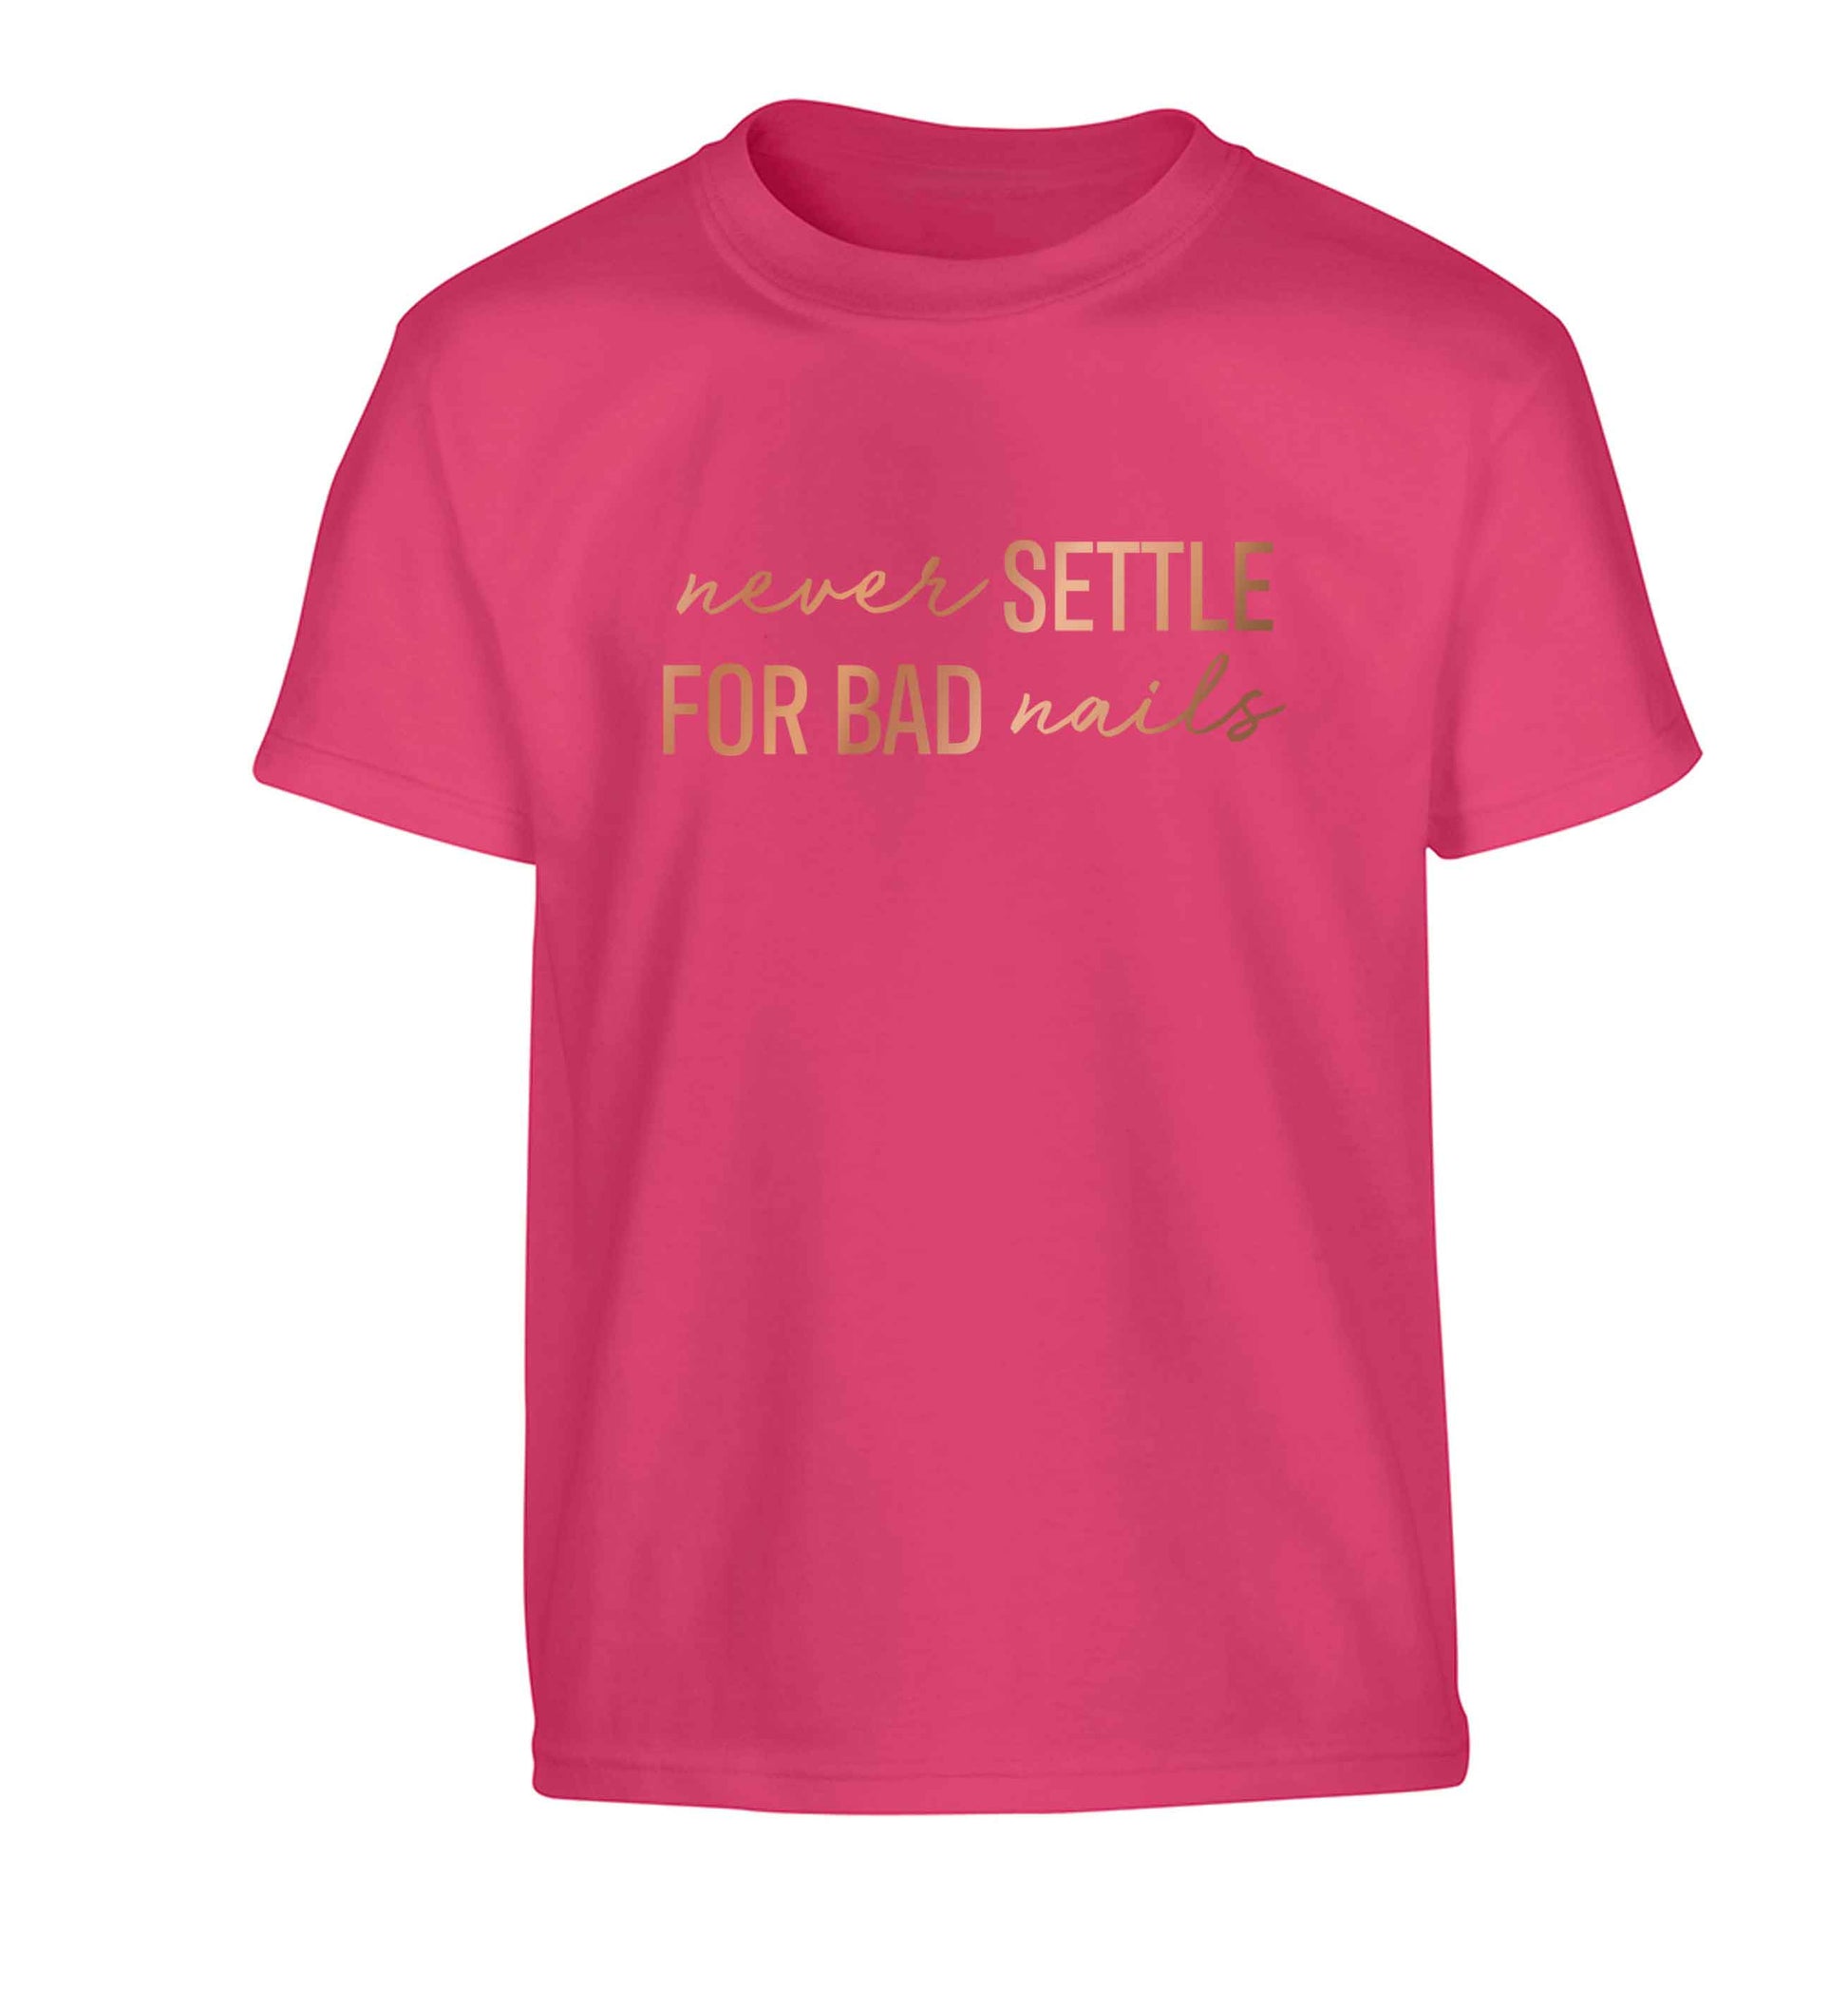 Never settle for bad nails - rose gold Children's pink Tshirt 12-13 Years